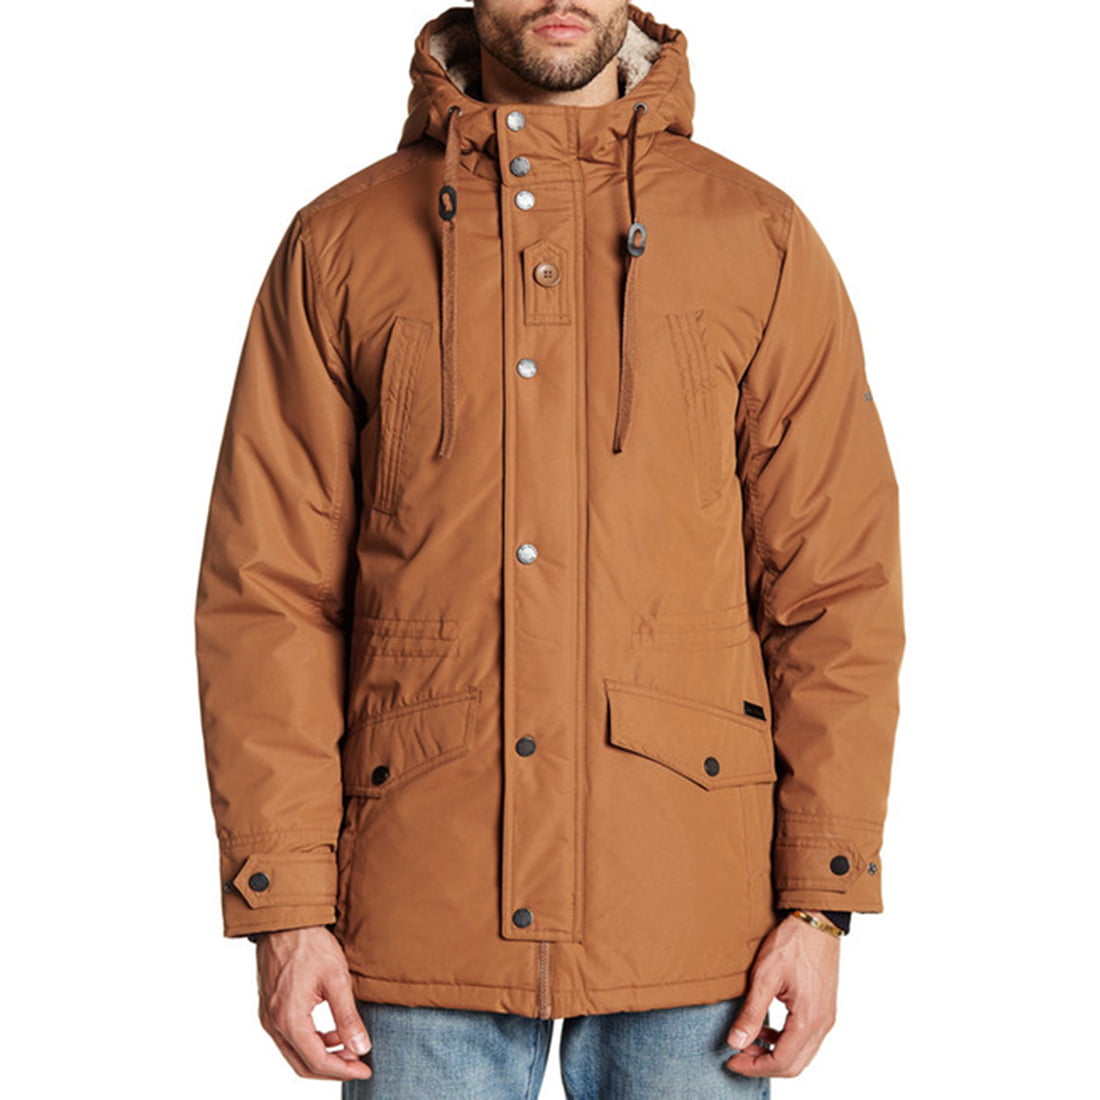 ben sherman men's parka jacket with sherpa hood lining, raw leather, l ...